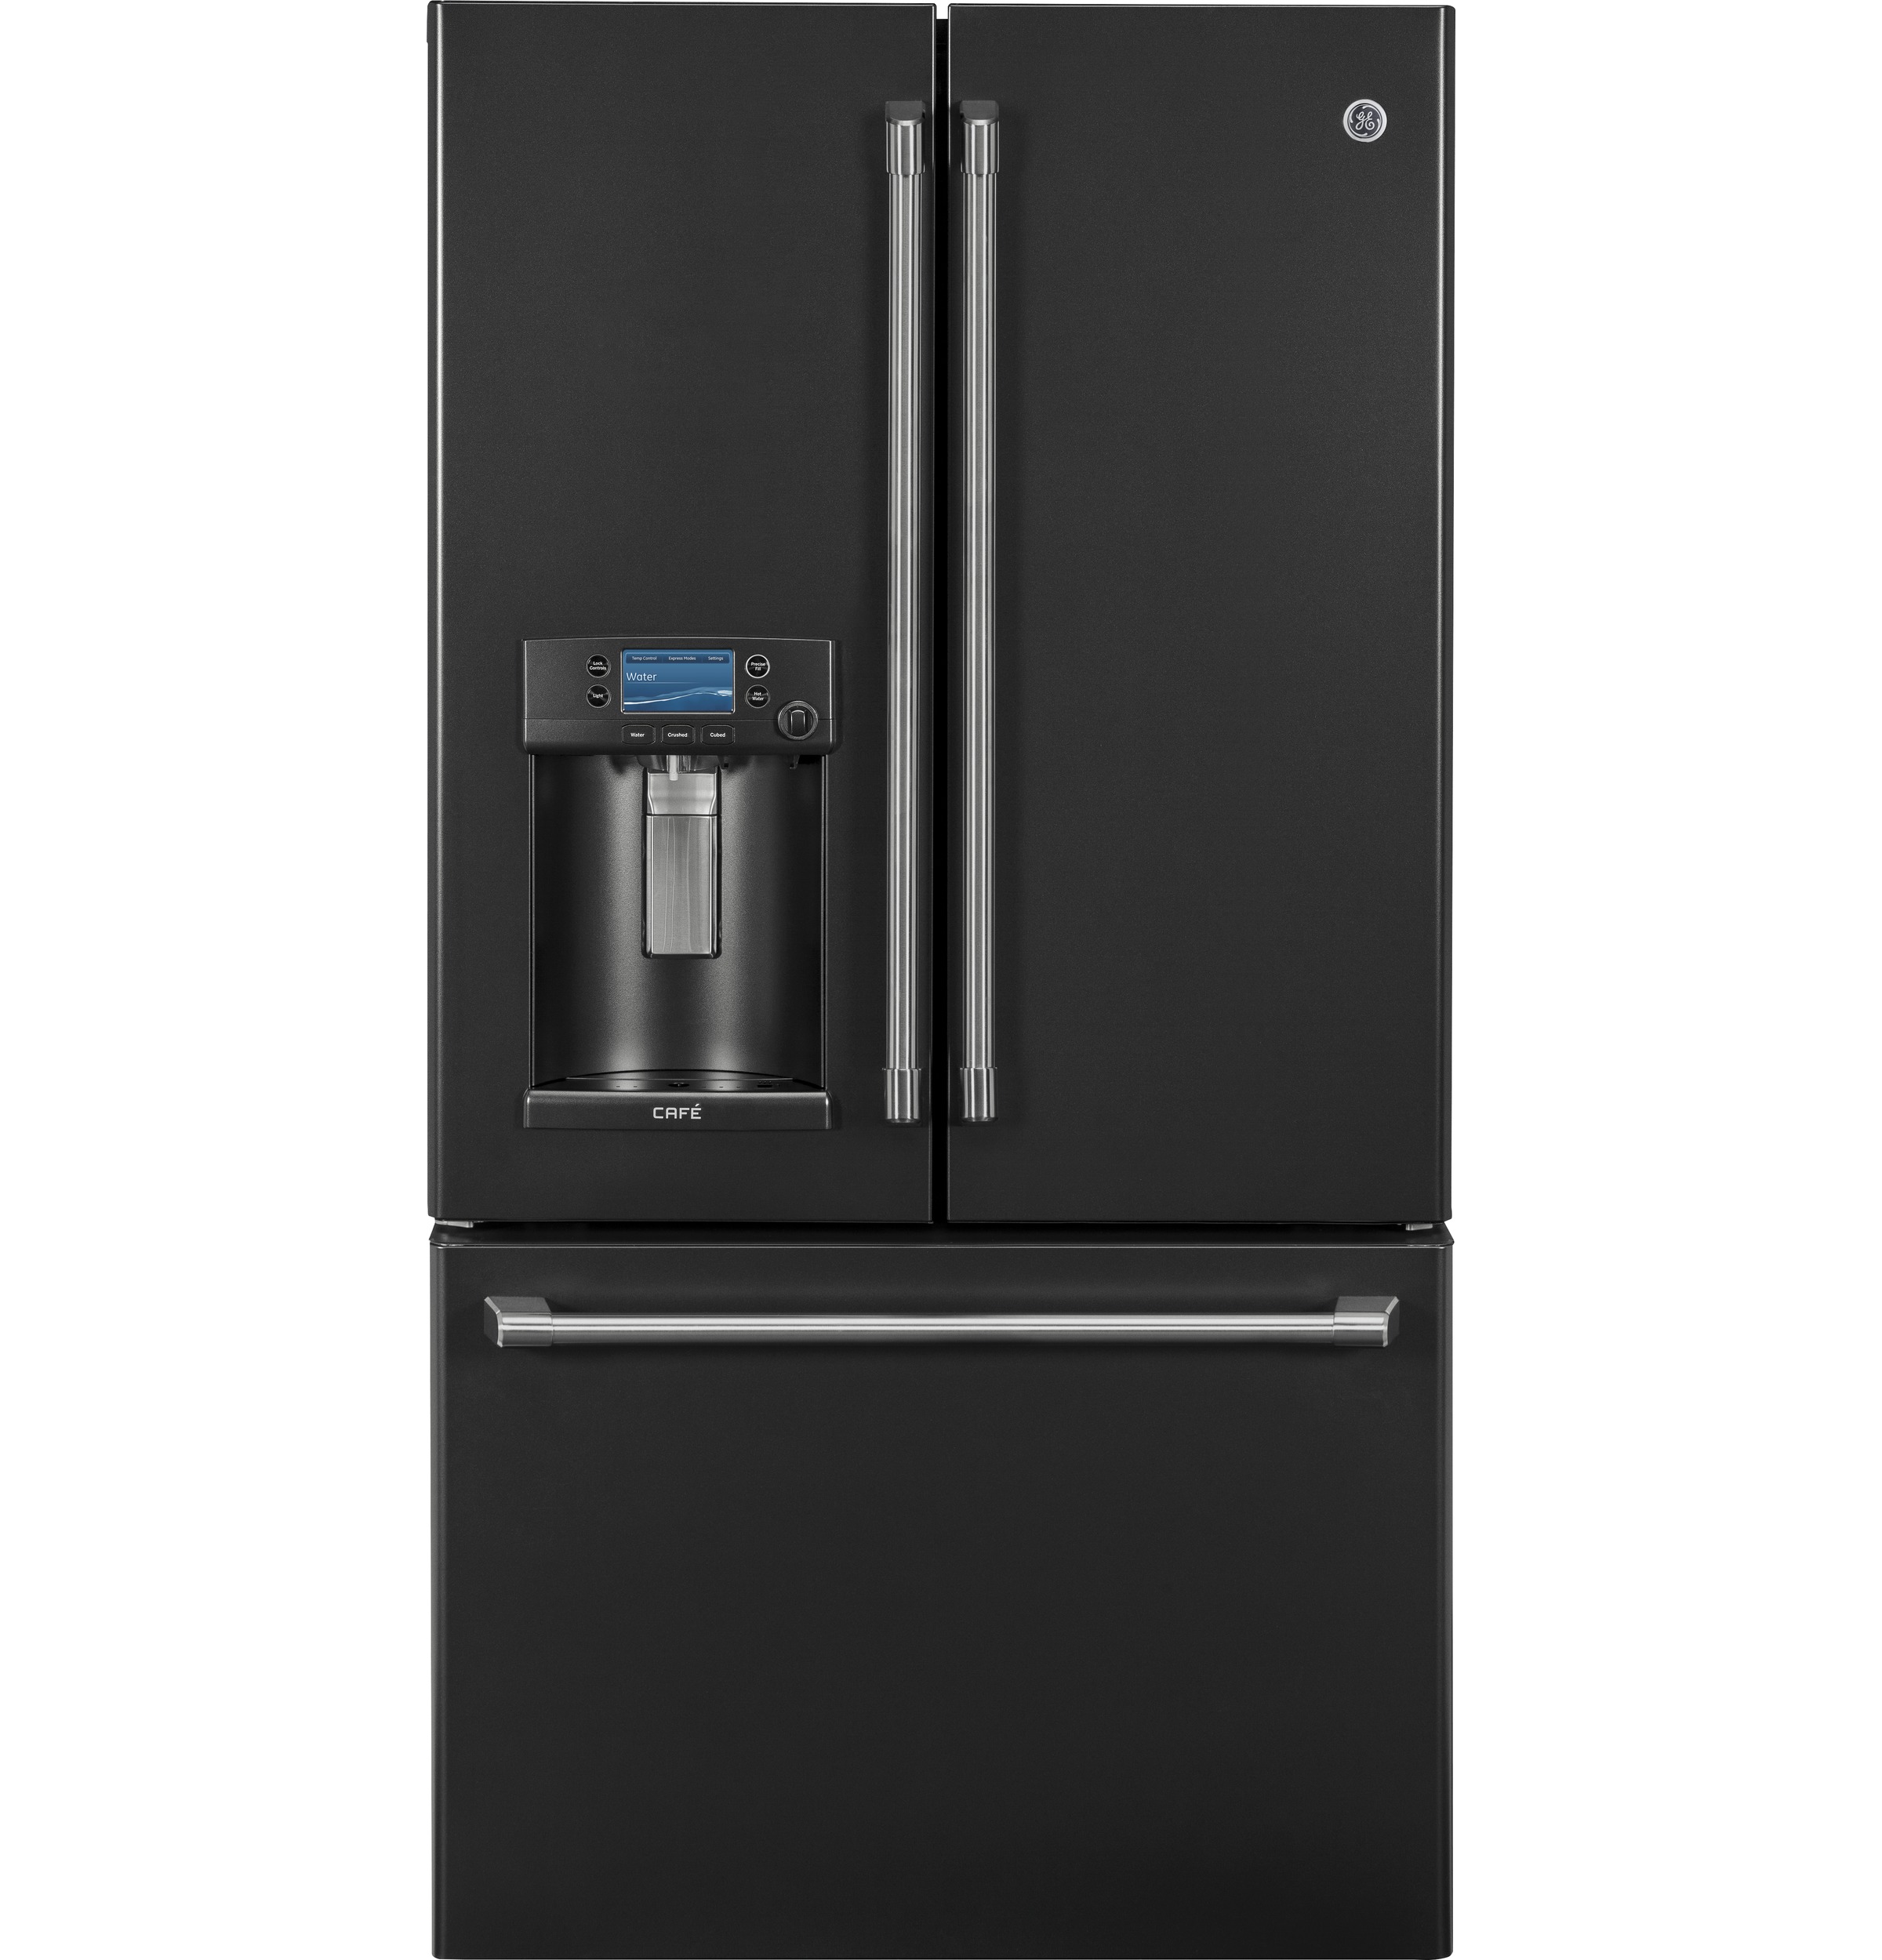 GE Café™ Series ENERGY STAR® 27.8 Cu. Ft. French-Door Refrigerator with Keurig® K-Cup® Brewing System